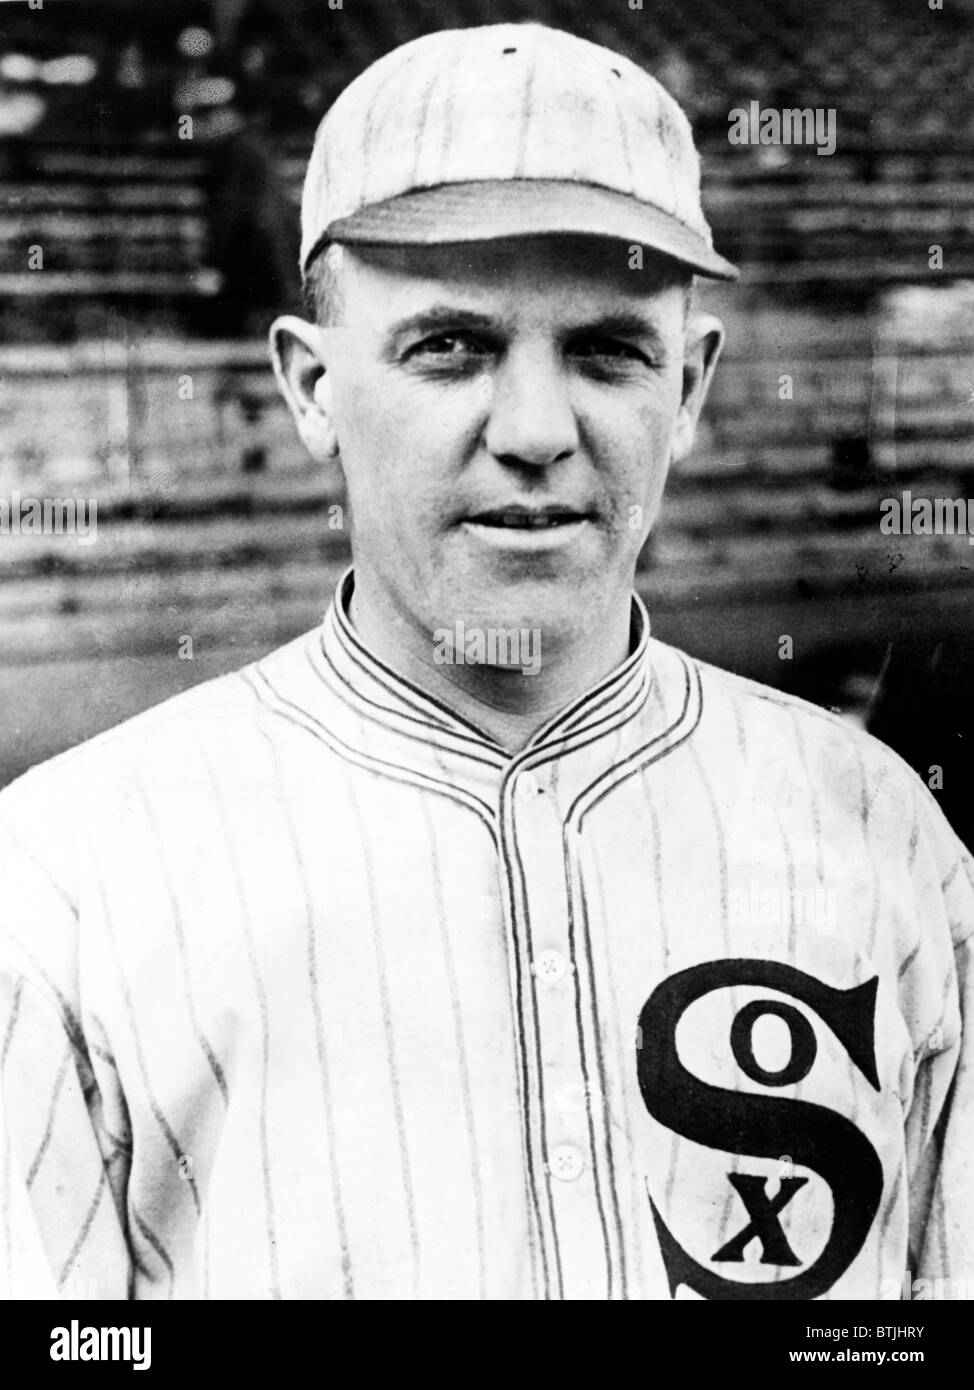 BASEBALL, Eddie Cicotte, pitcher & player for the Chicago White Sox baseball  team, from 1912-1920 Stock Photo - Alamy